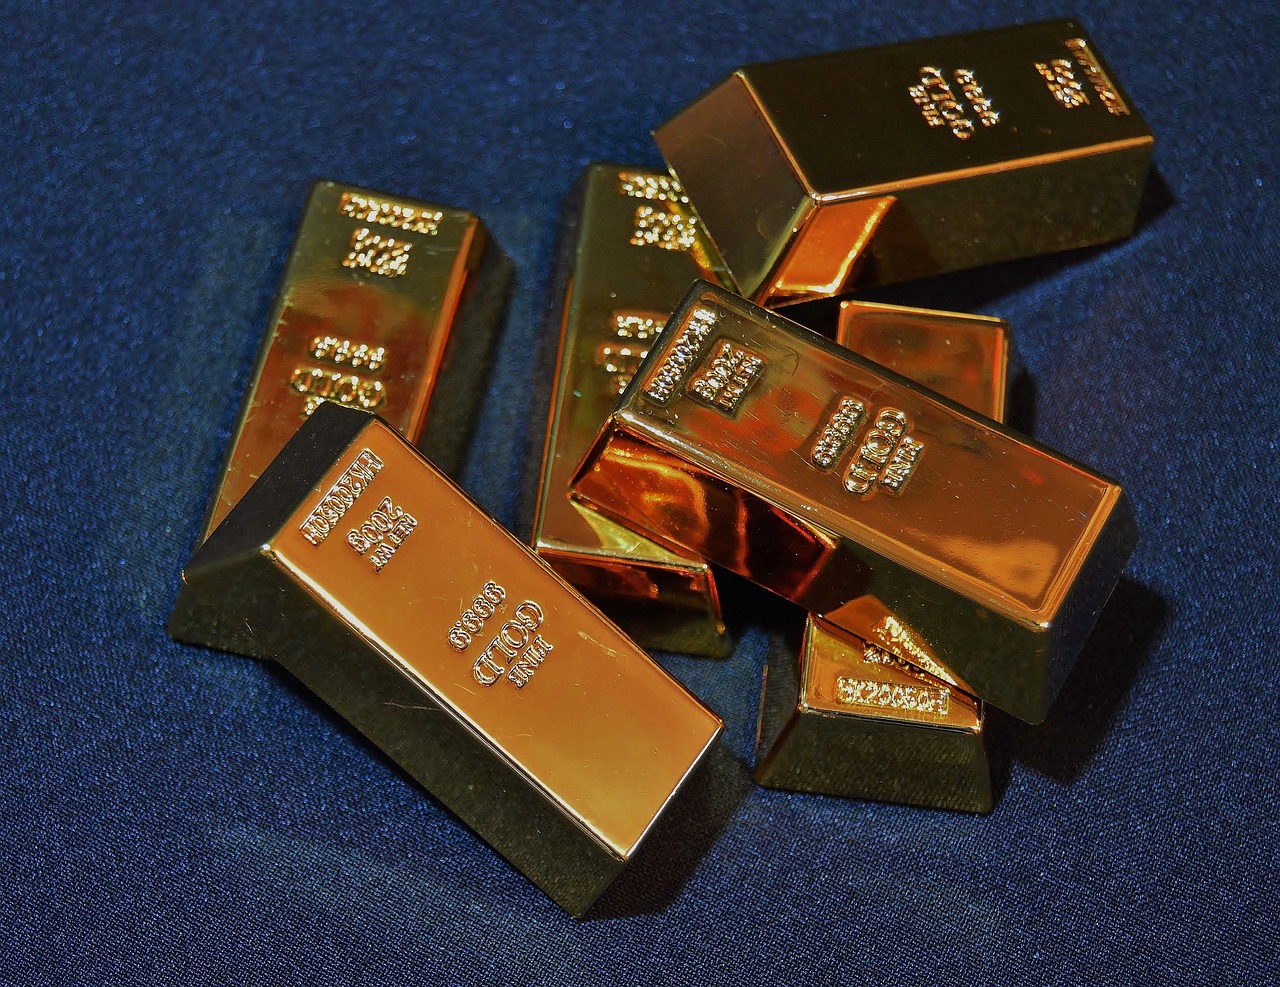 gold bars collection free photo